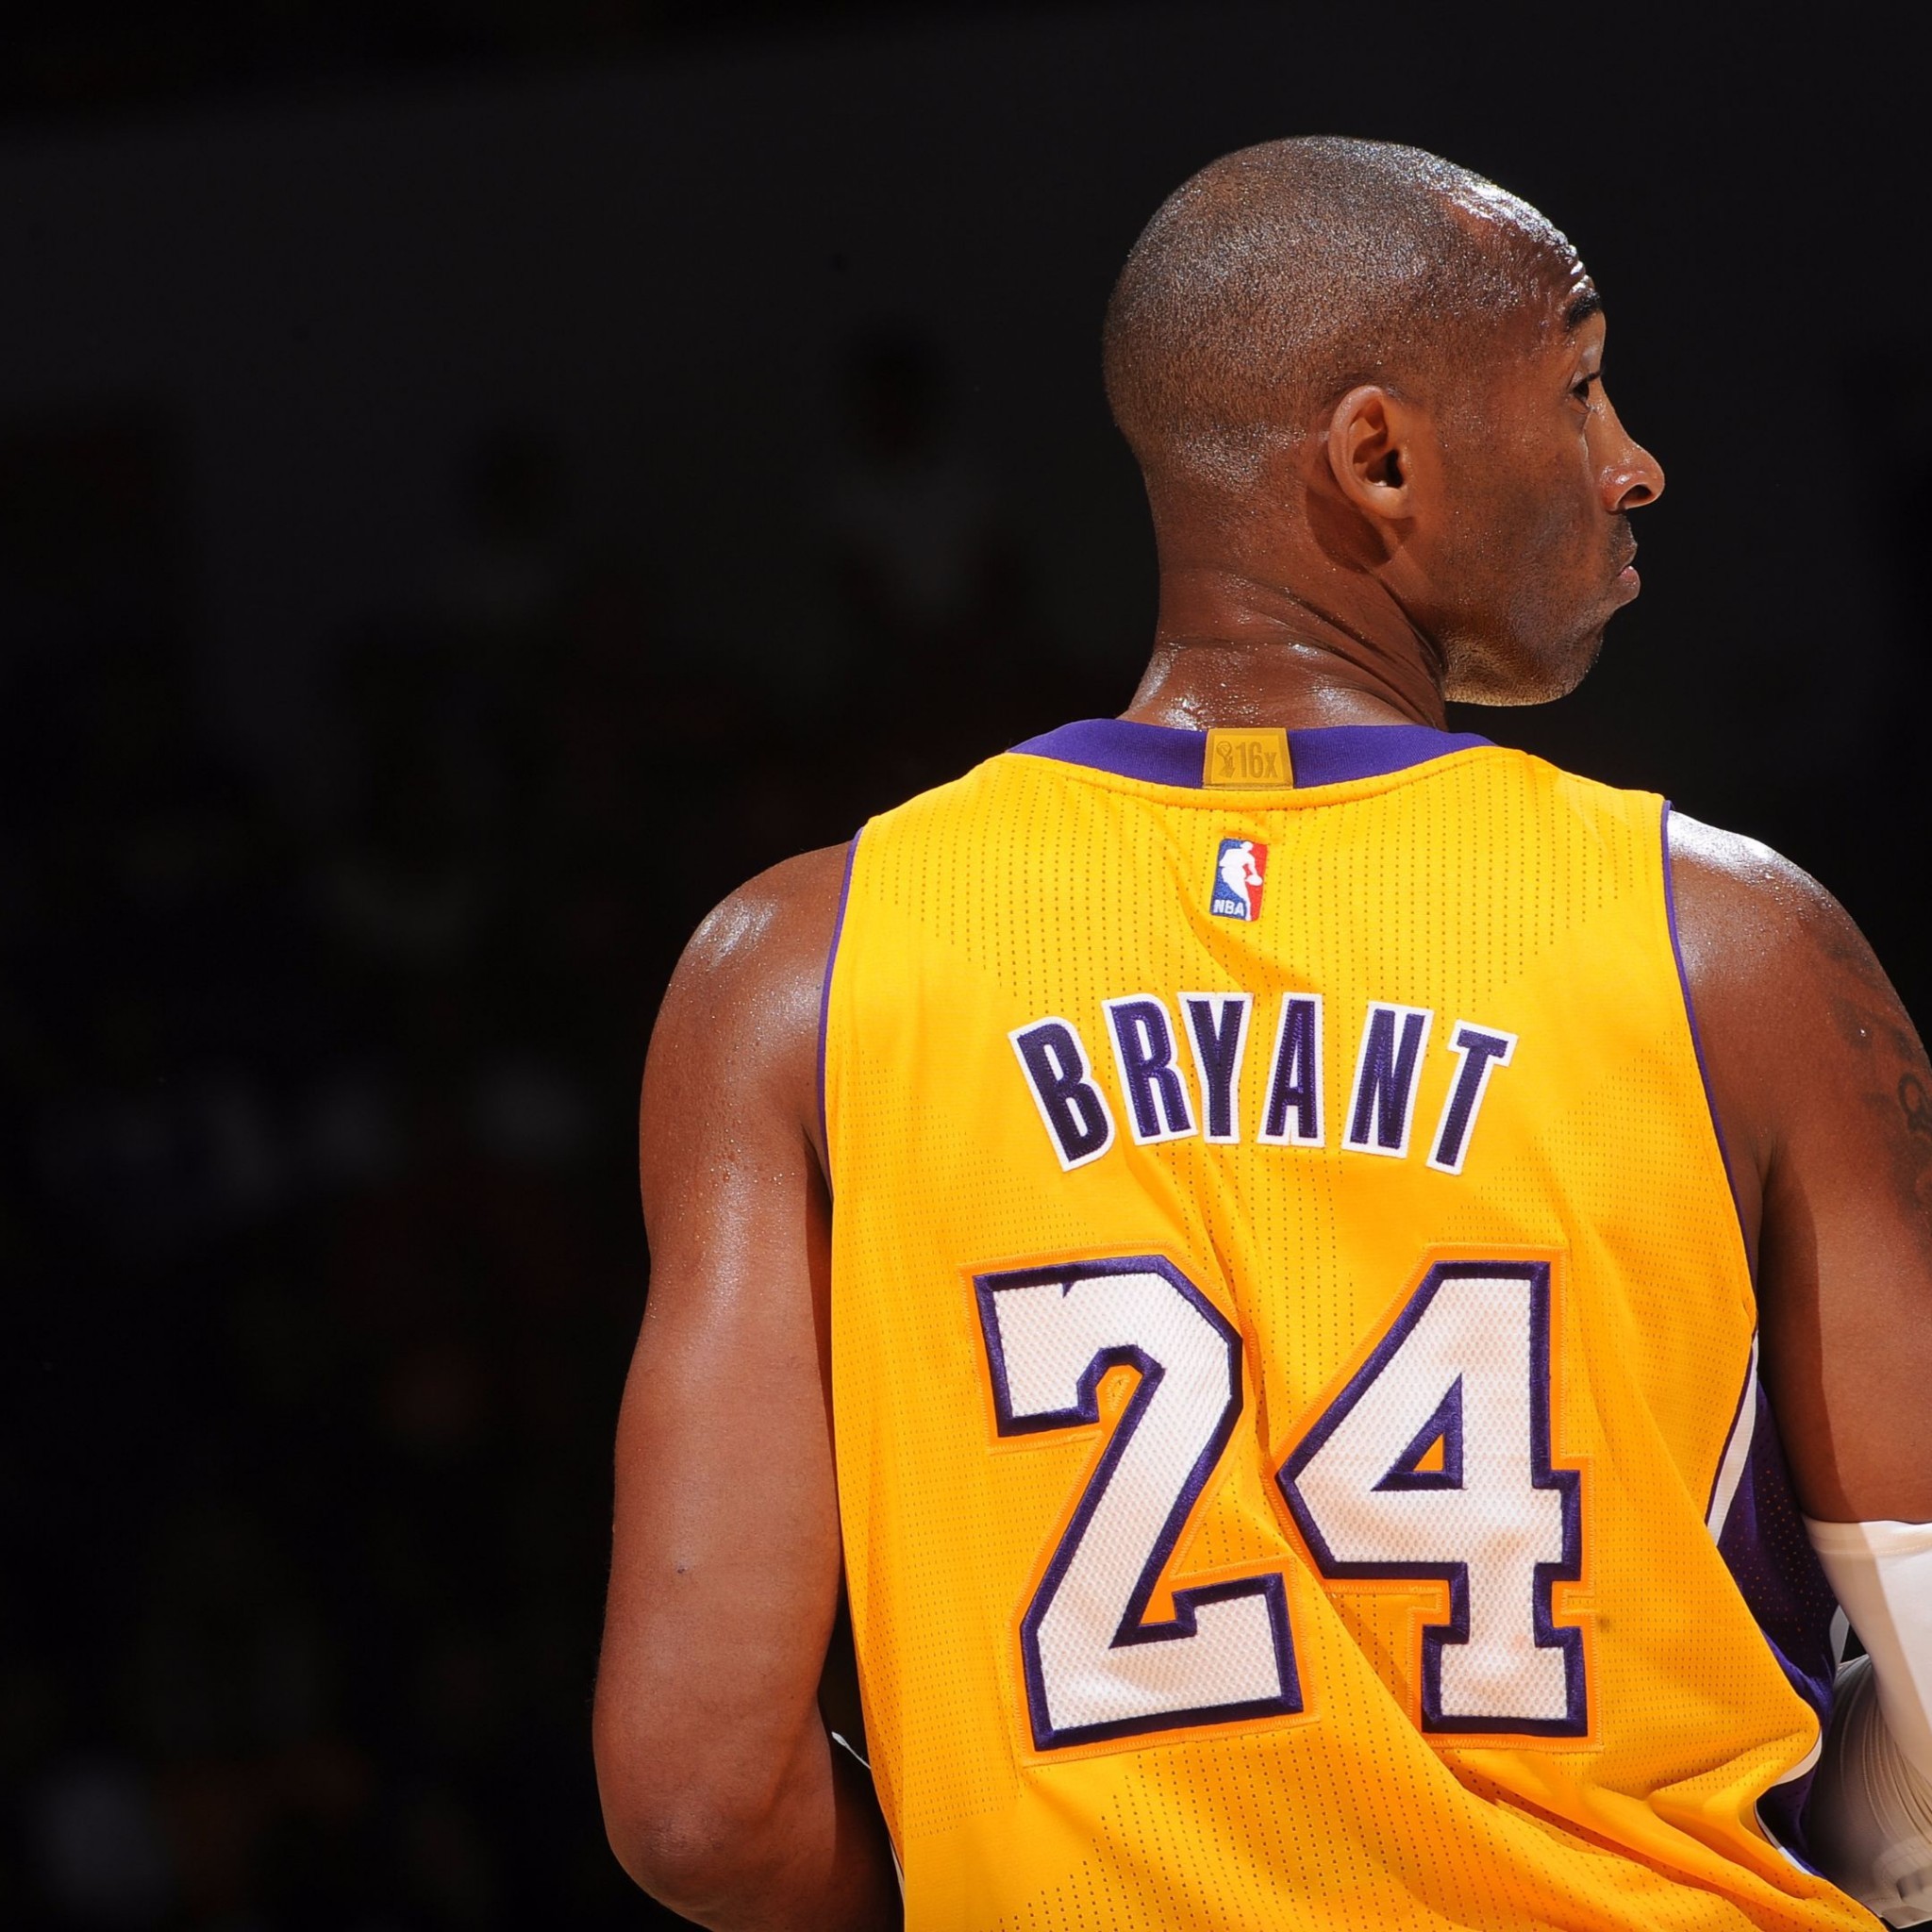 30 Kobe Bryant Wallpapers HD for iPhone 2016  Apple Lives